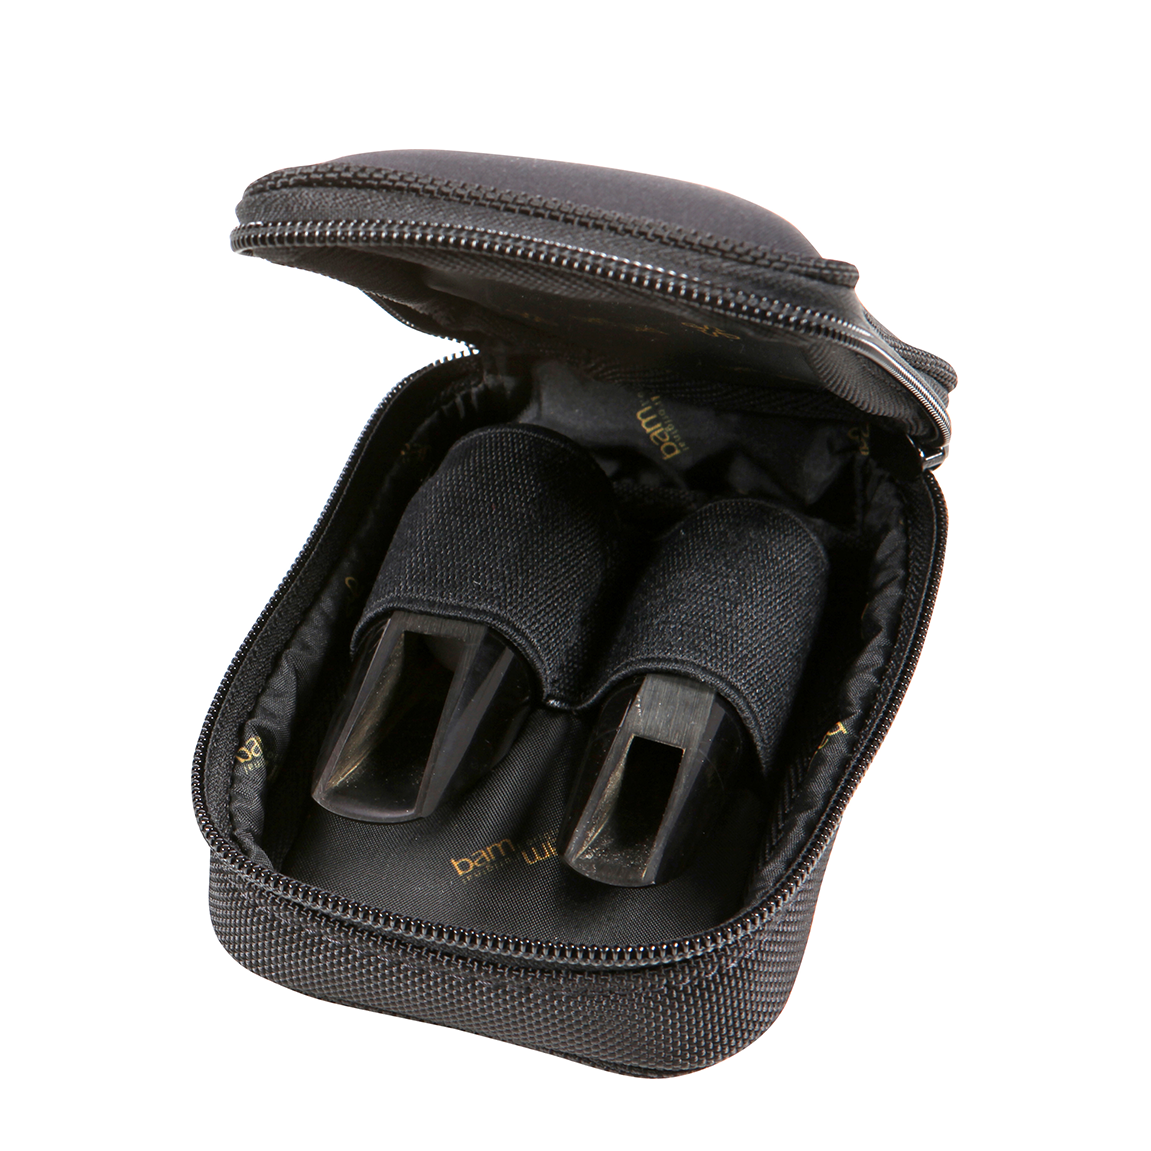 Bam - Double Mouthpiece Pouch for Soprano/Alto Saxophone, Bb/A Clarinet-Accessories-Bam-Music Elements